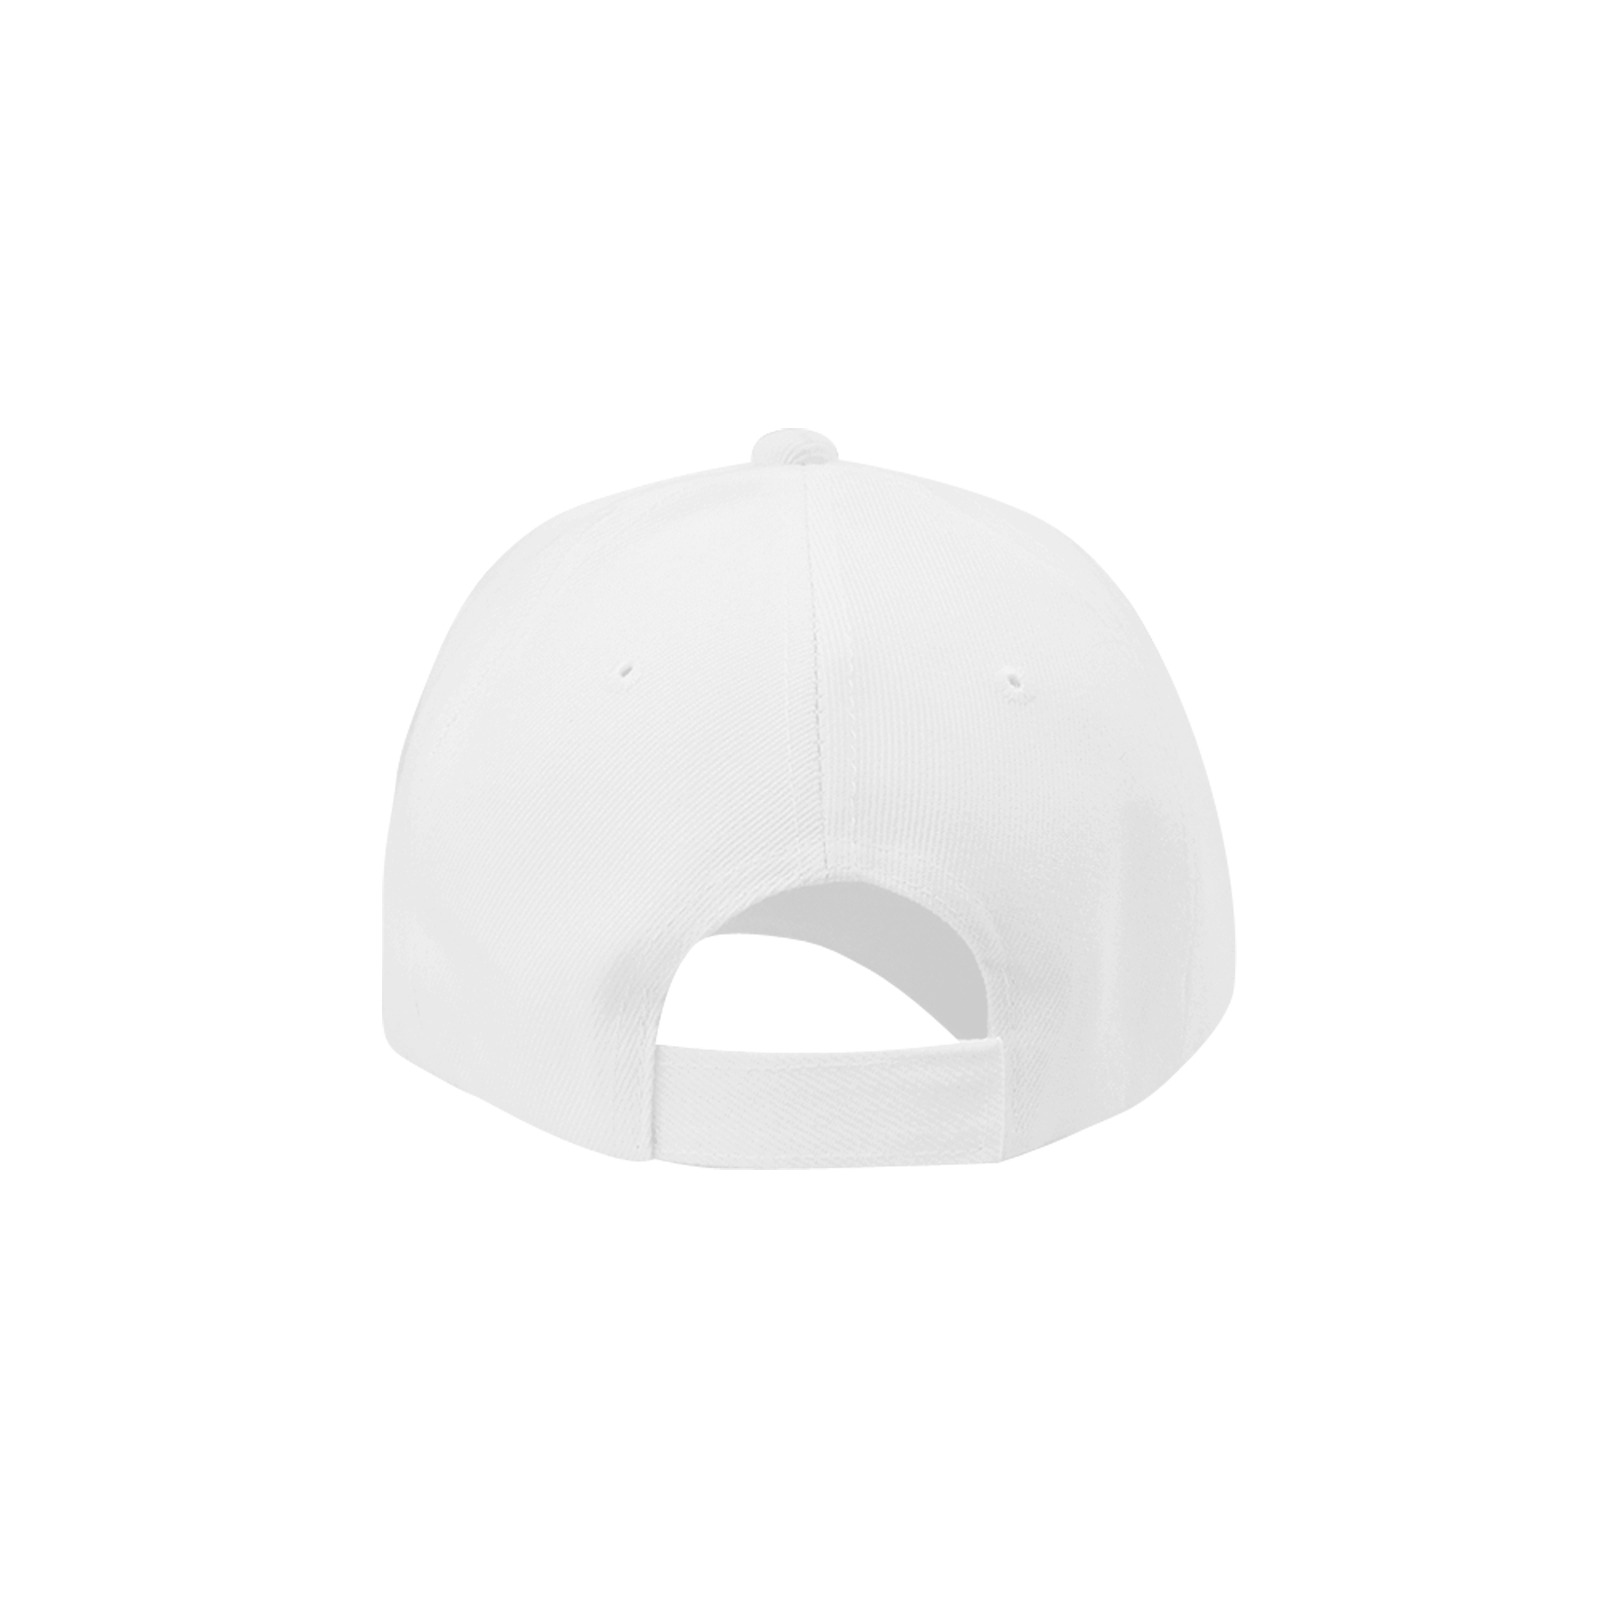 CAPE COD-GREAT WHITE EATING HOT DOG Dad Cap